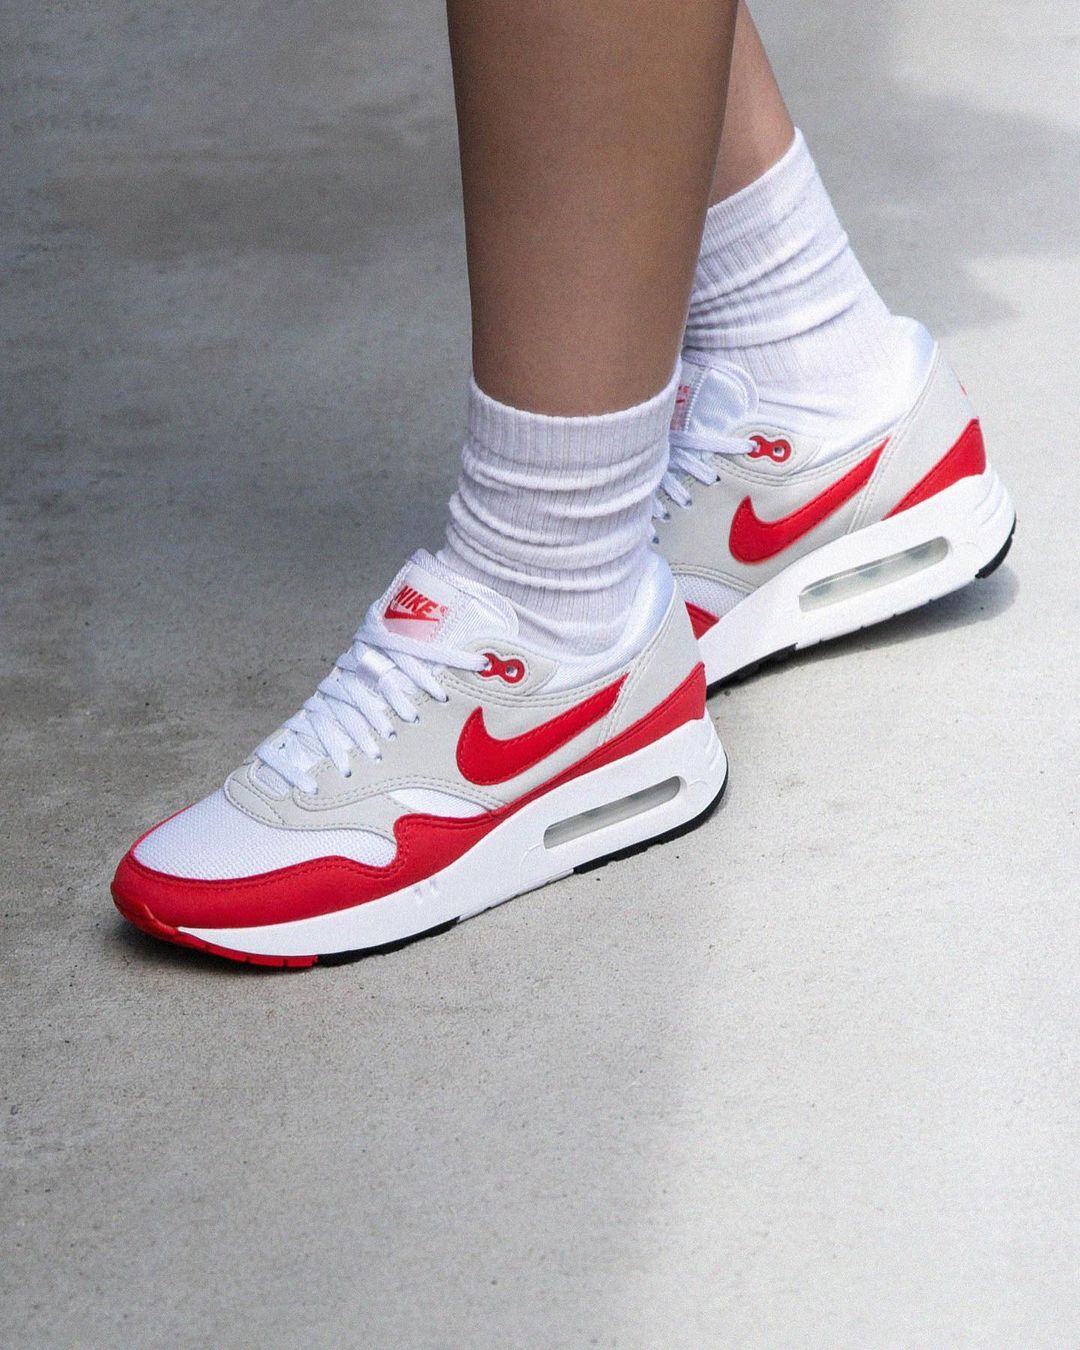 cliente colchón en frente de Sneaker News on Twitter: "If you get a "W" on the "Big Bubble" pair, will  it be your first time owning the original Nike Air Max 1? 🫧  https://t.co/jkVAsZF6yM" / Twitter